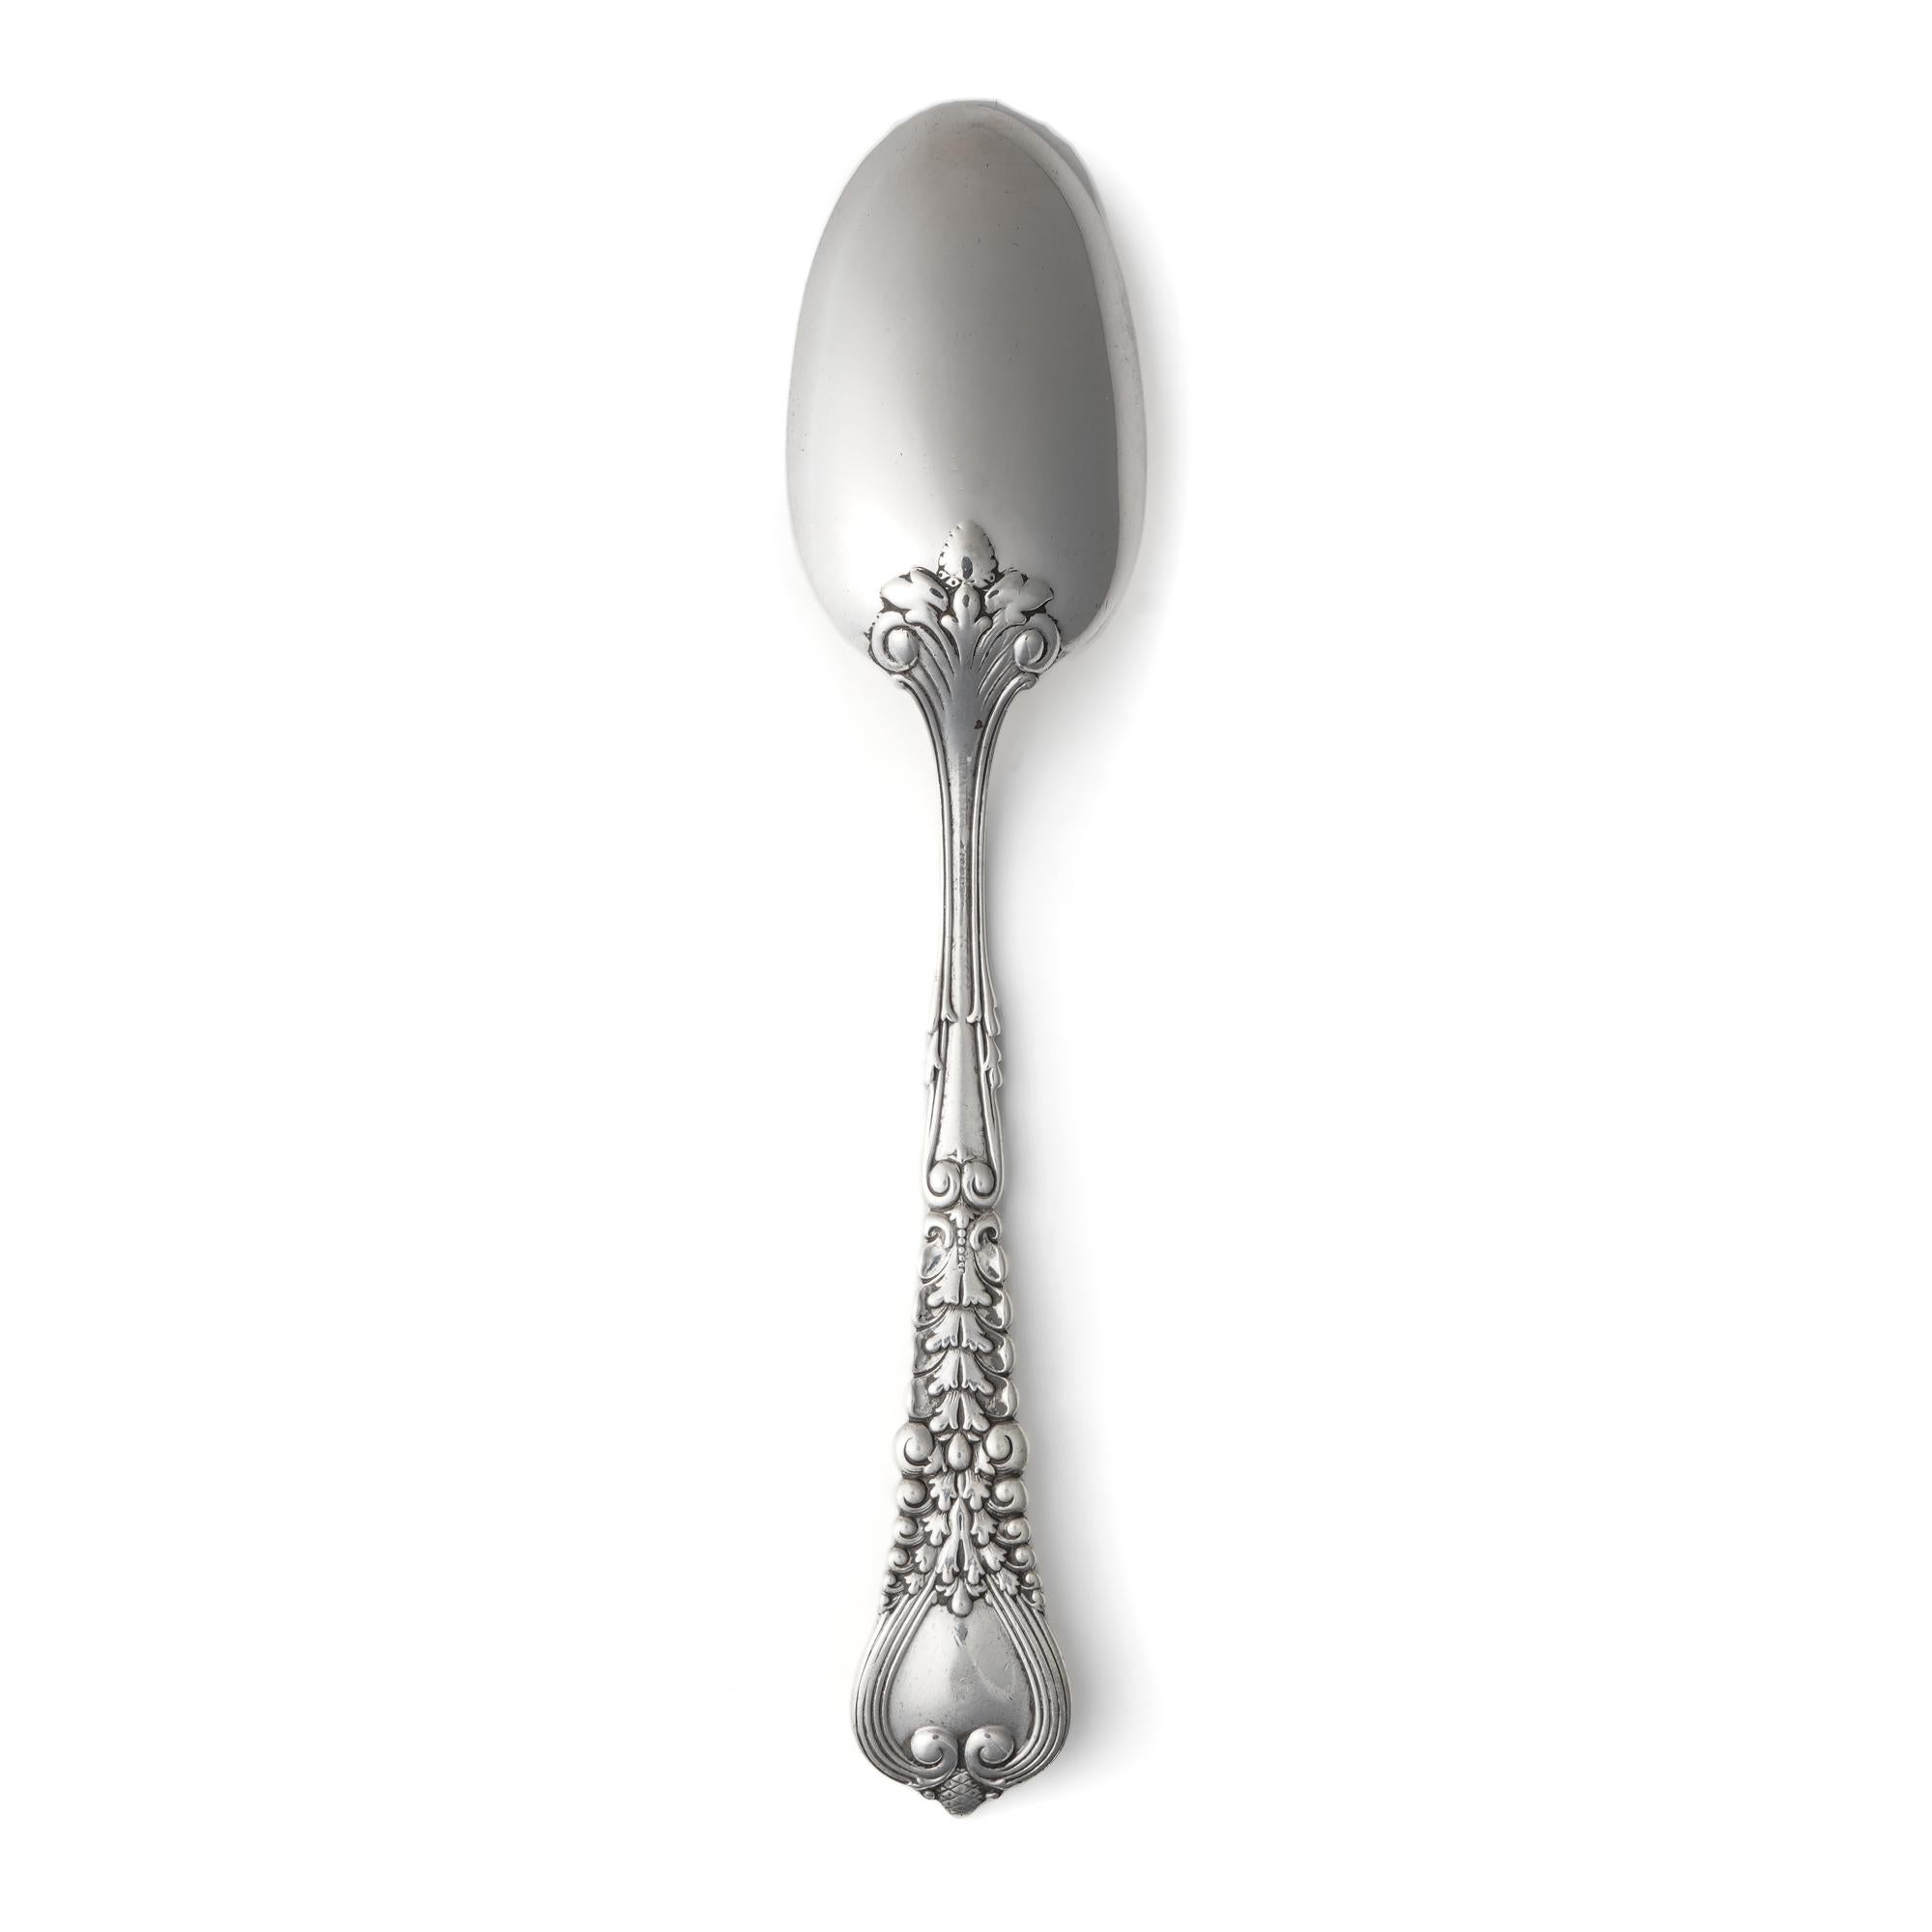 Antique Tiffany & Co. Sterling Silver Florentine Pattern Large Spoon For Sale 1